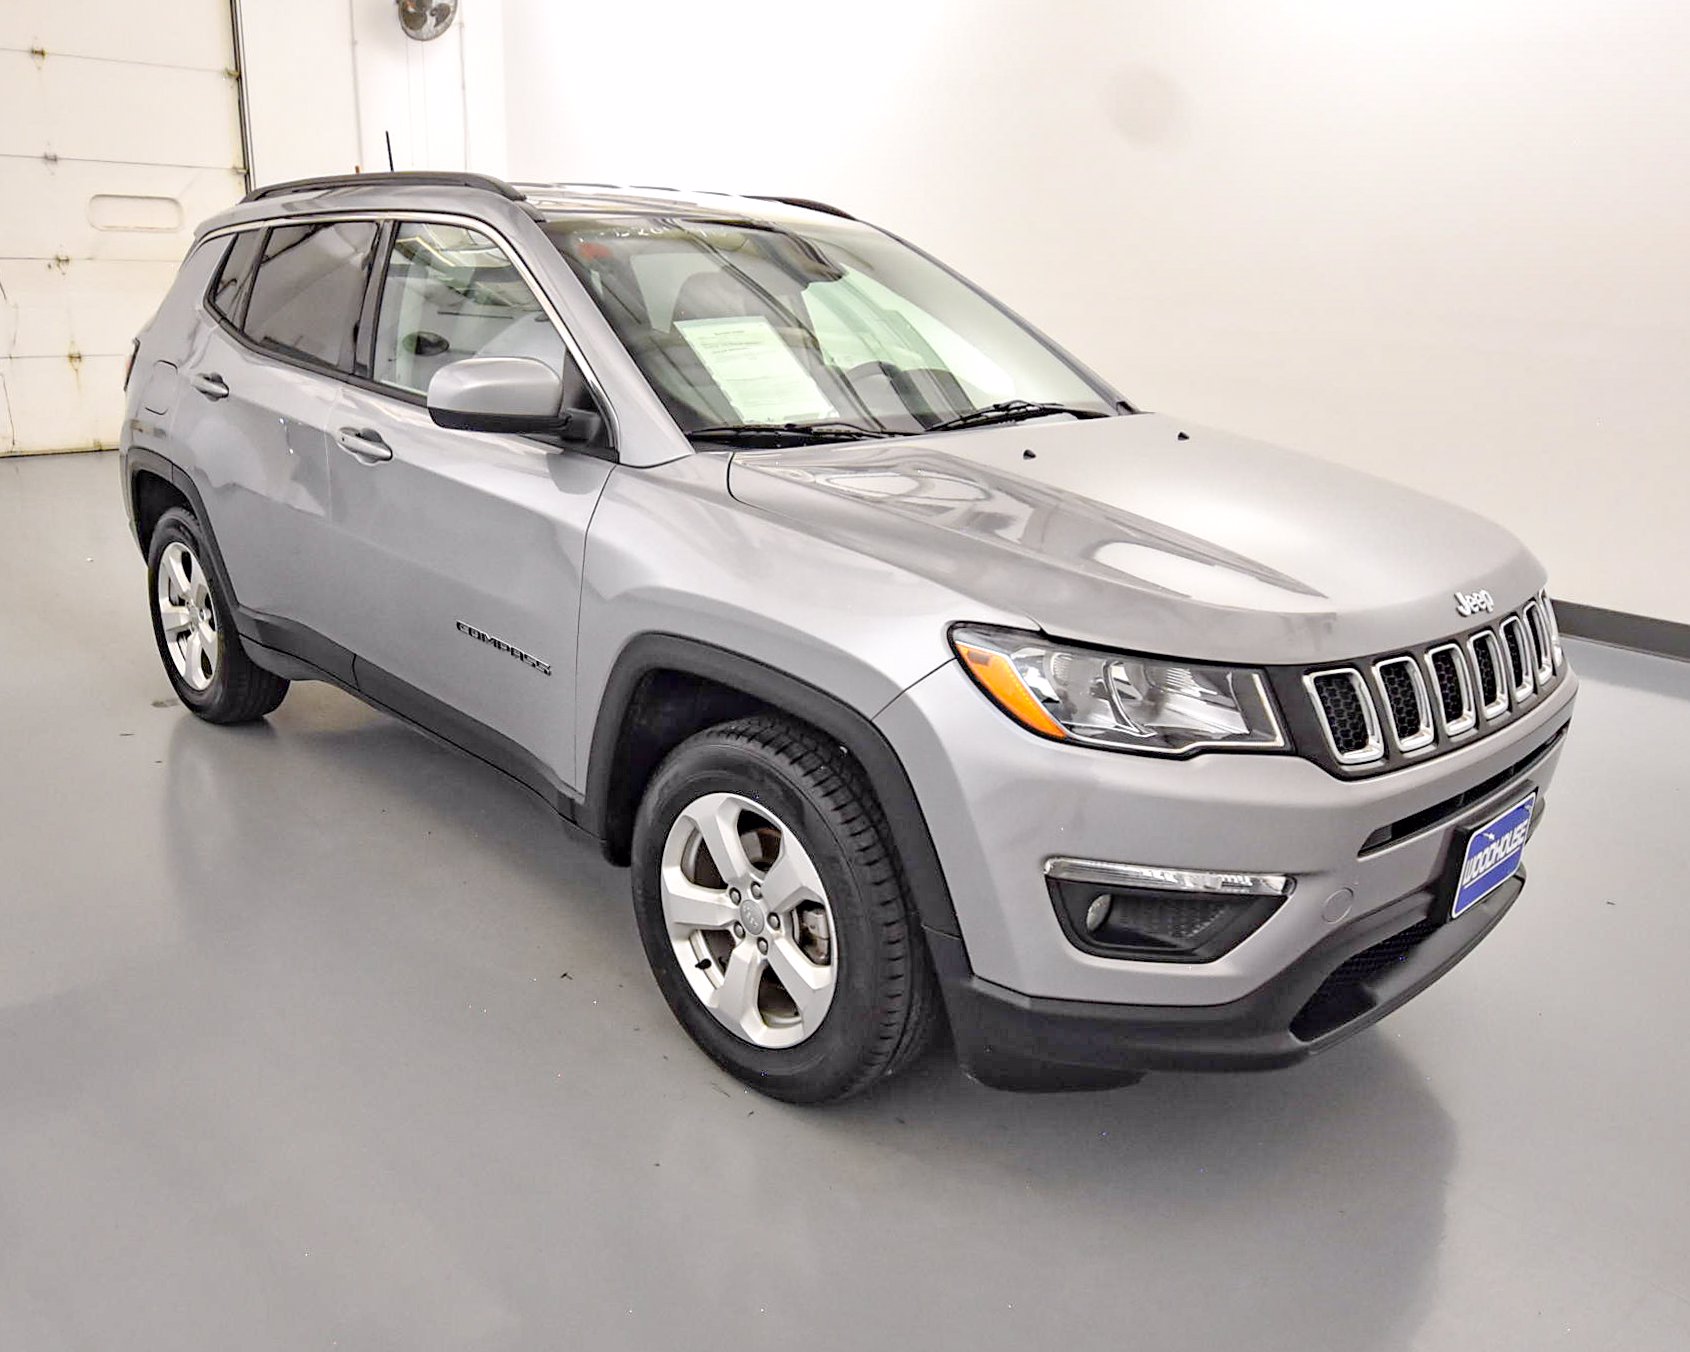 PreOwned 2017 Jeep Compass Latitude 4WD